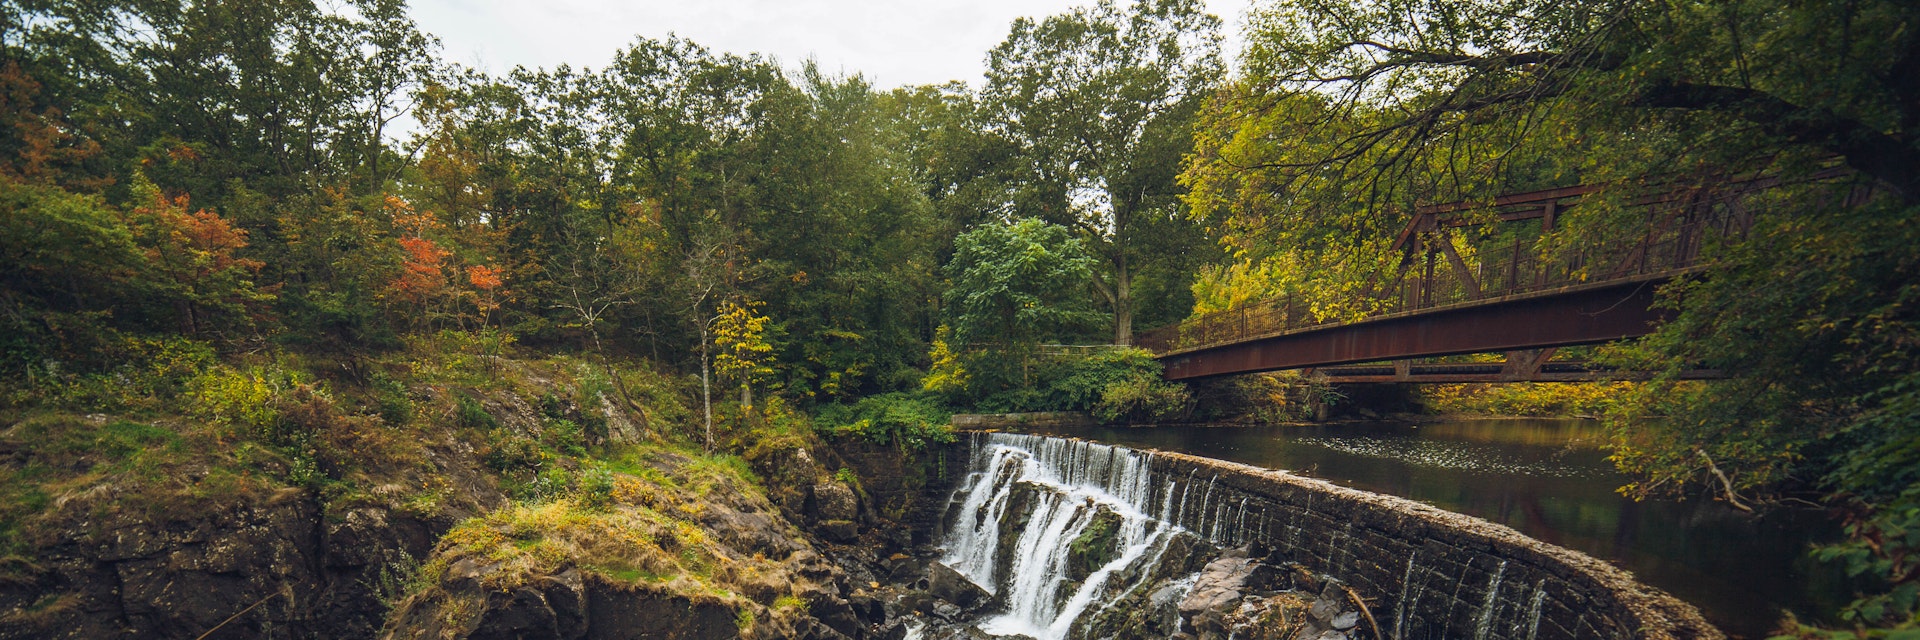 The thin streams of the waterfall are shot using the wide-angle lens, the skies are gloomy and the flora around is in dark warm colors, mostly green and yellow.